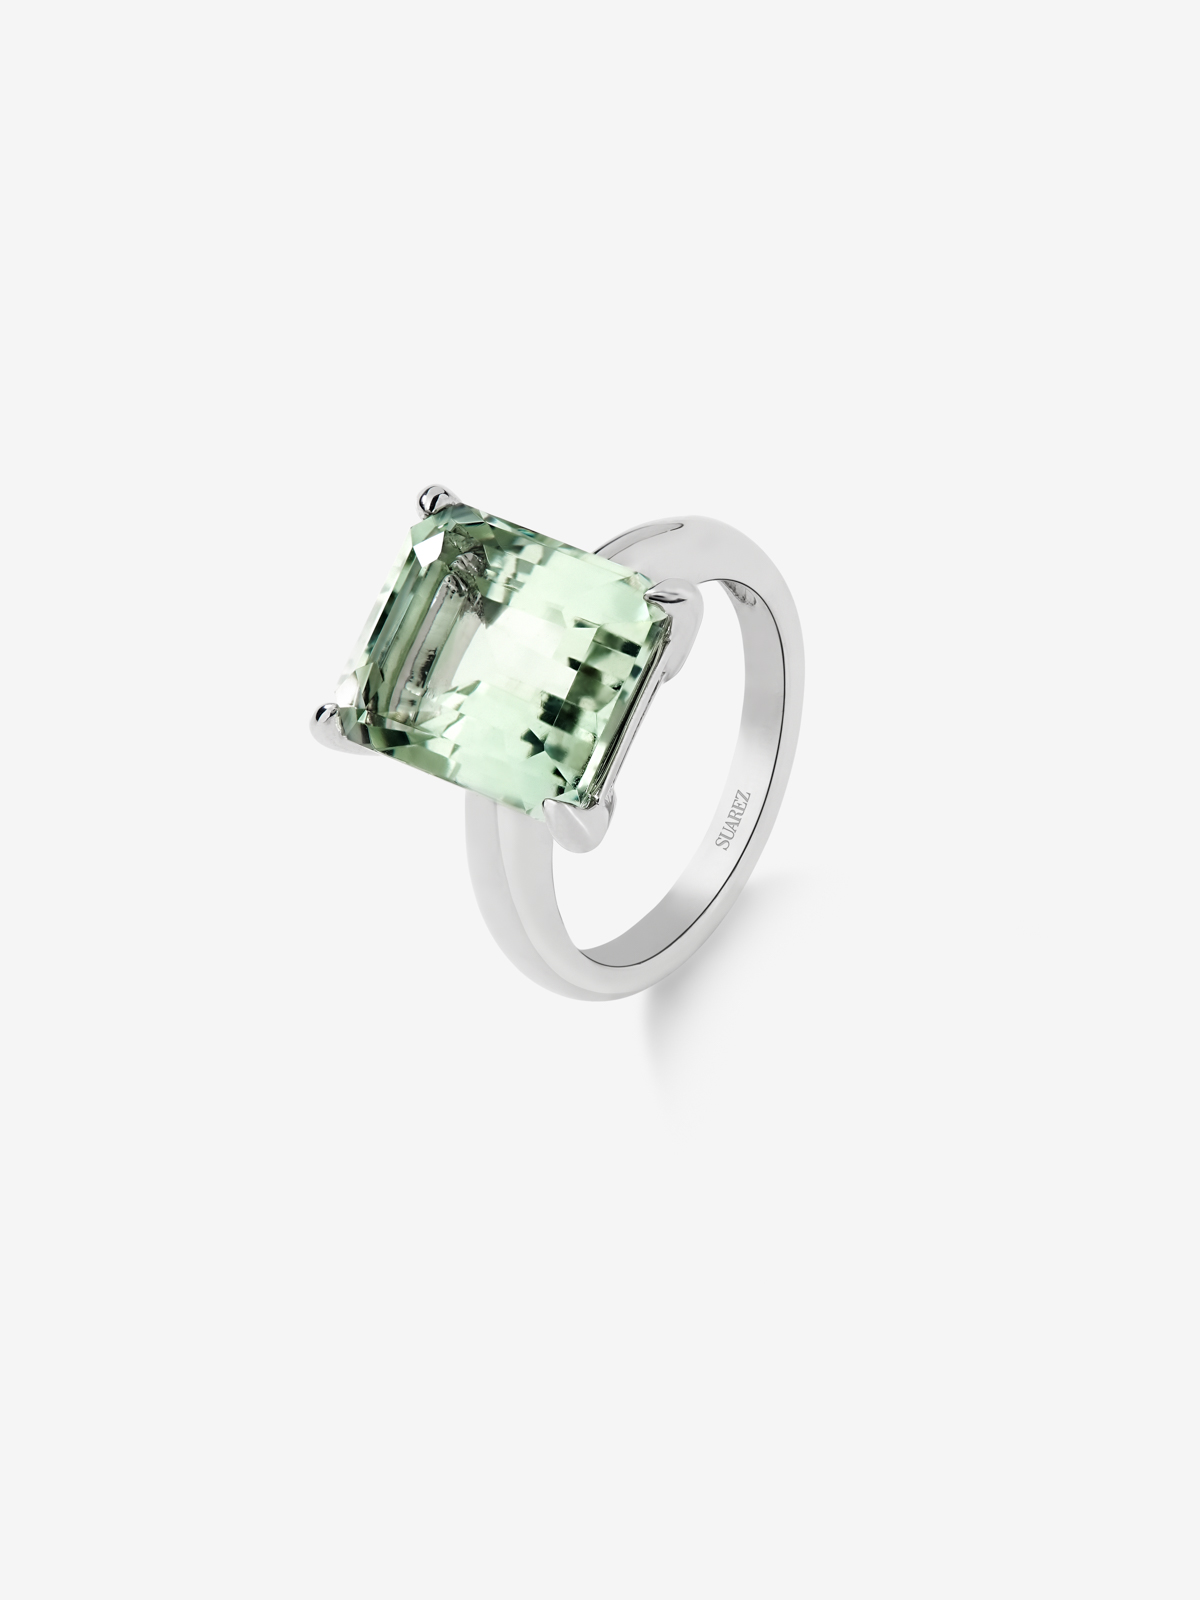 925 silver ring with green amethyst